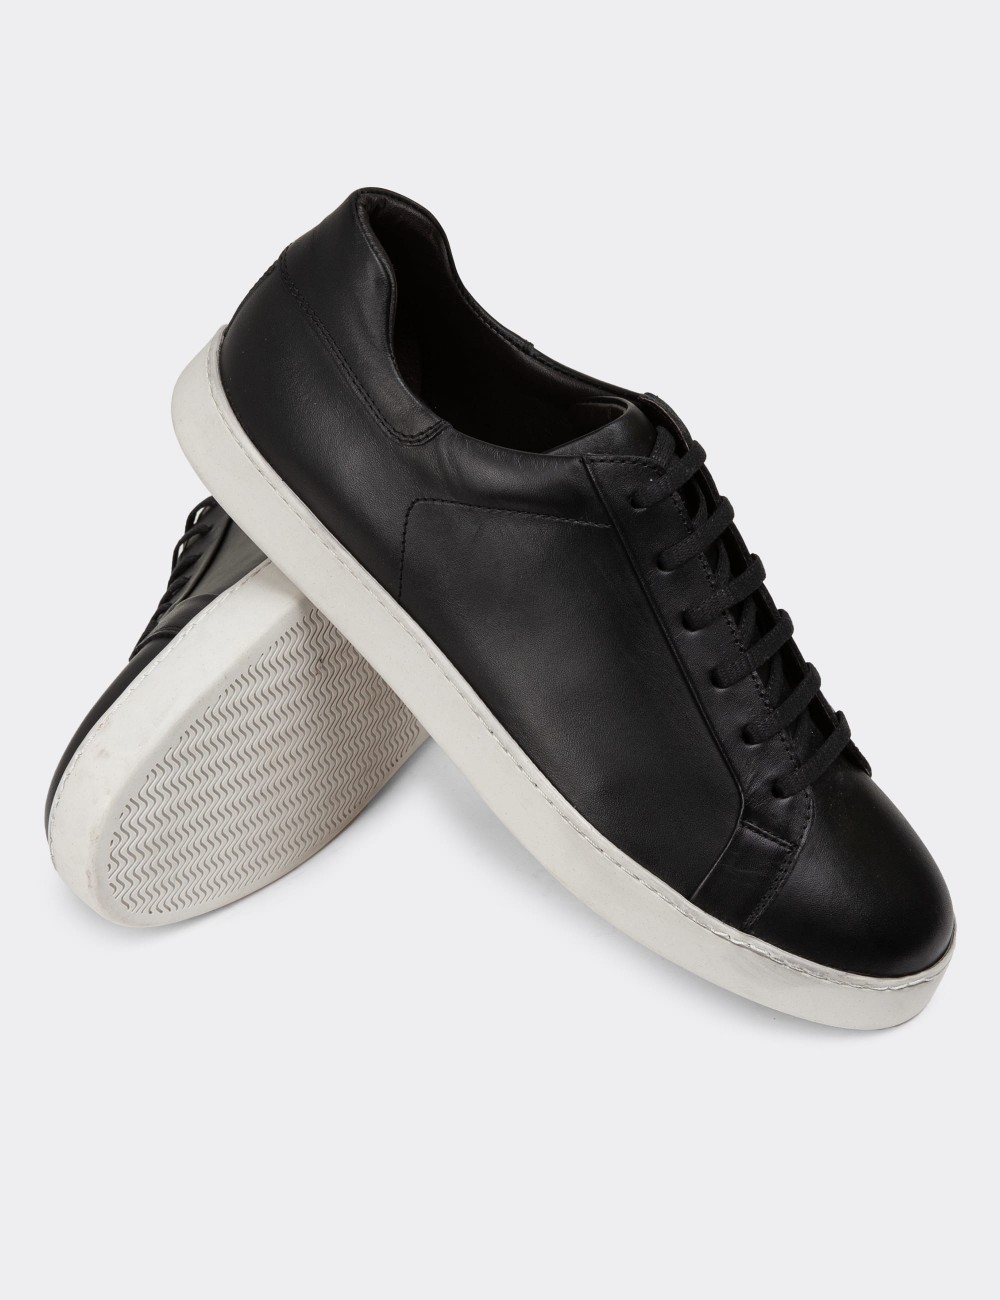 Black Leather Sneakers - 01955MSYHC02